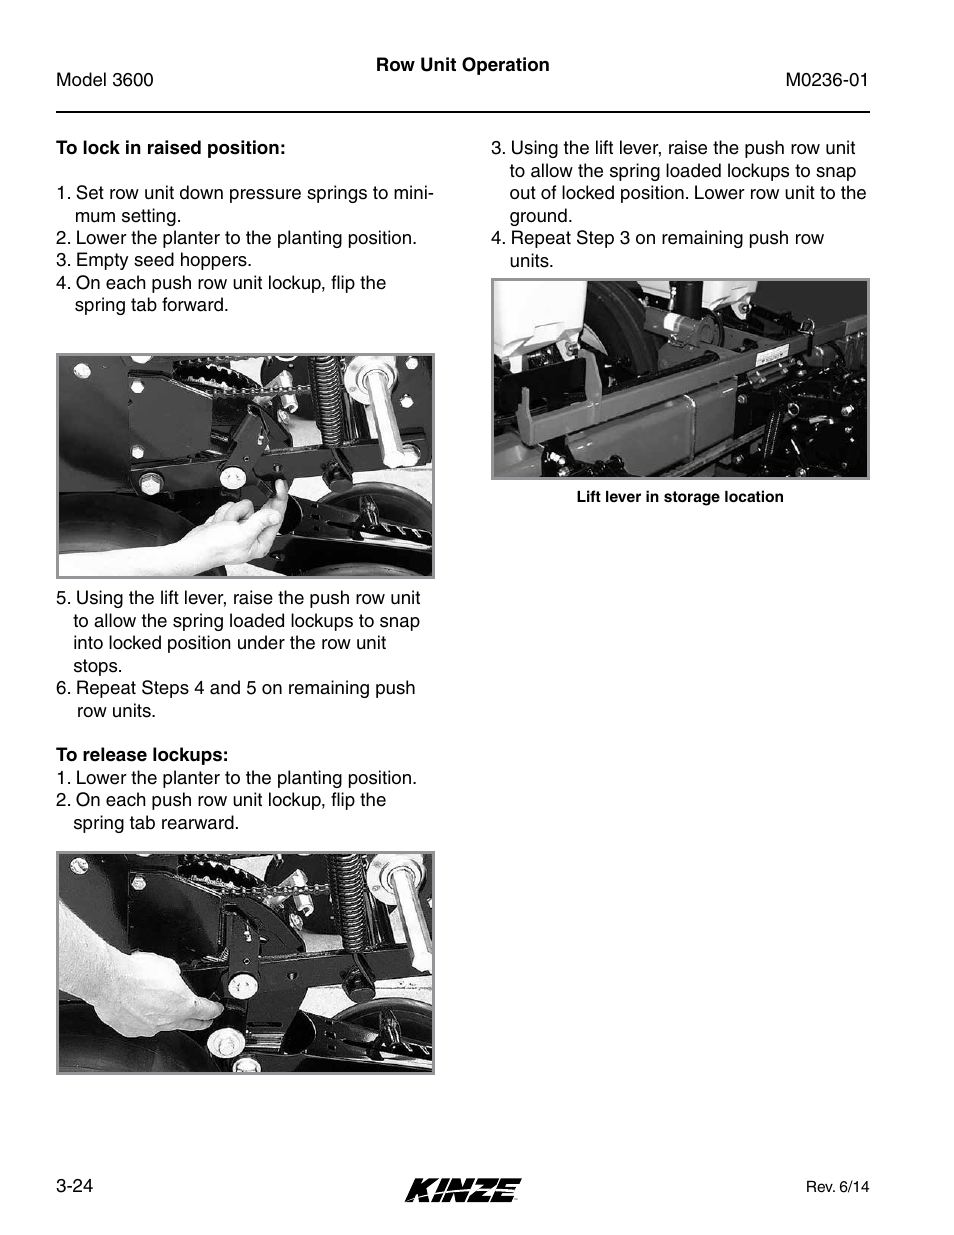 Kinze 3600 Lift and Rotate Planter Rev. 7/14 User Manual | Page 68 / 172